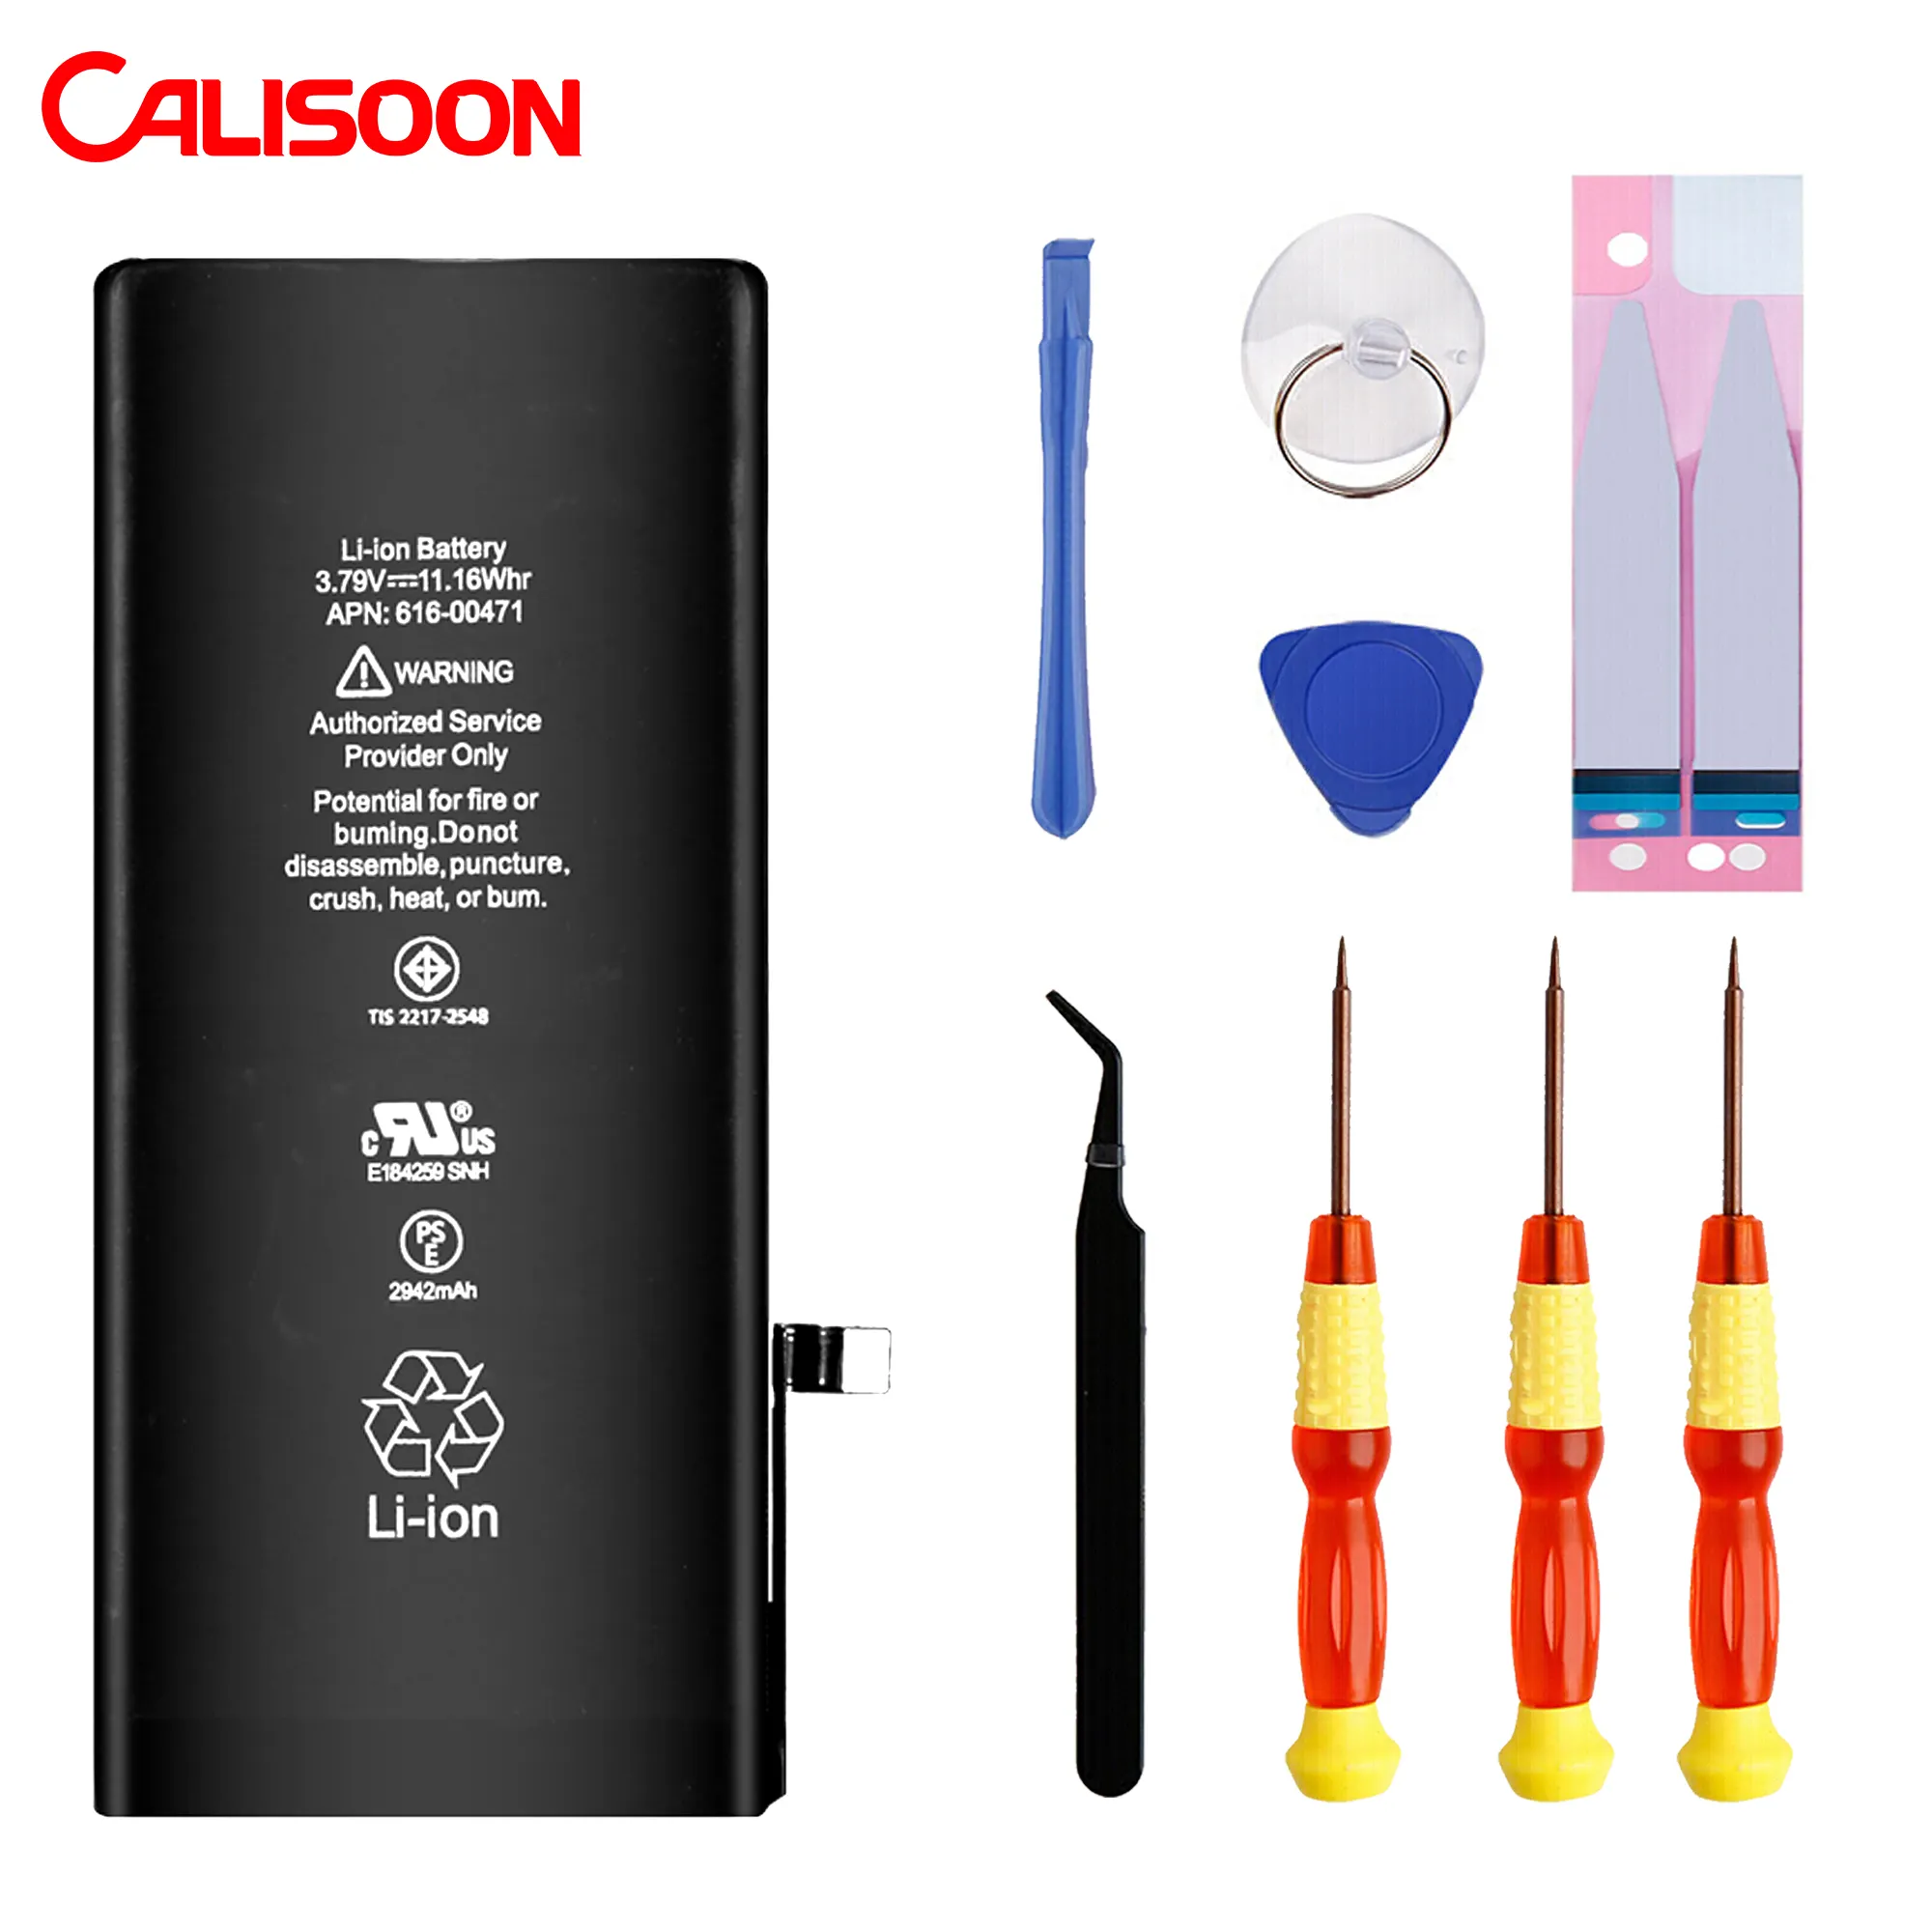 Calisoon Original 1:1 Mobile Phone Battery For IPhone 6 6s 7 8 plus x xr xs 11 12 pro max 5 5c 5s se Rechargeable Polymer